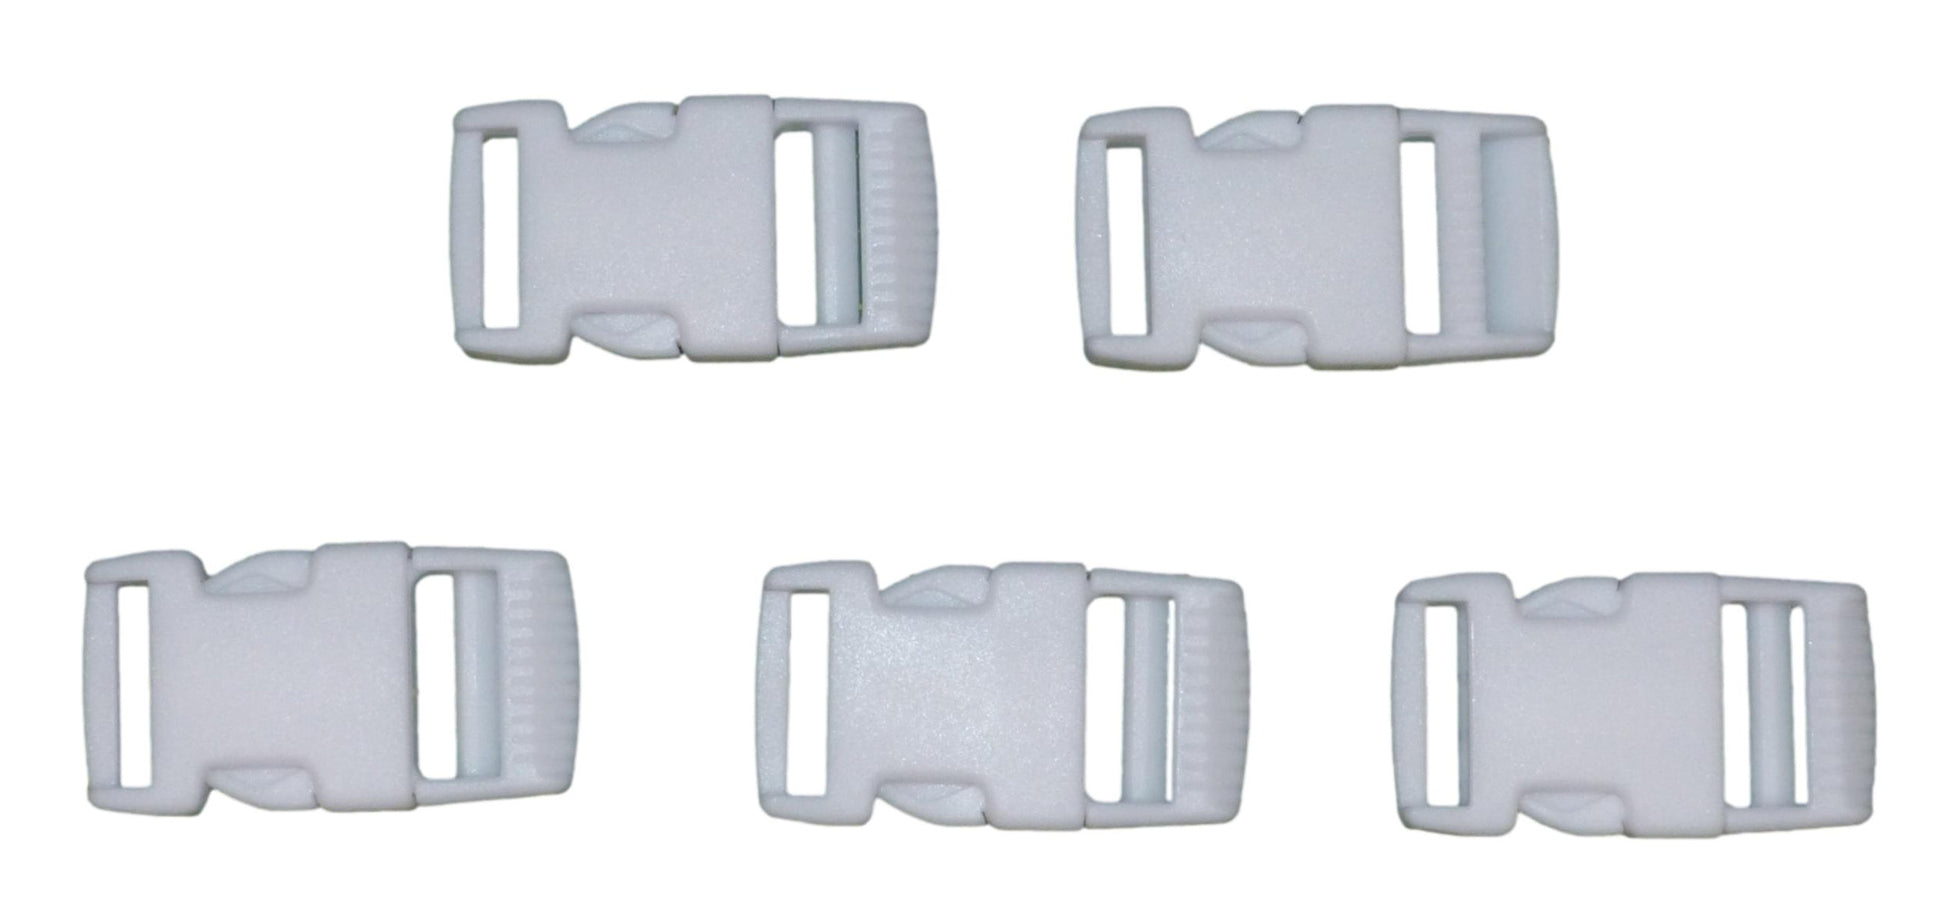 25mm plastic quick release buckle in white (pack of 5)